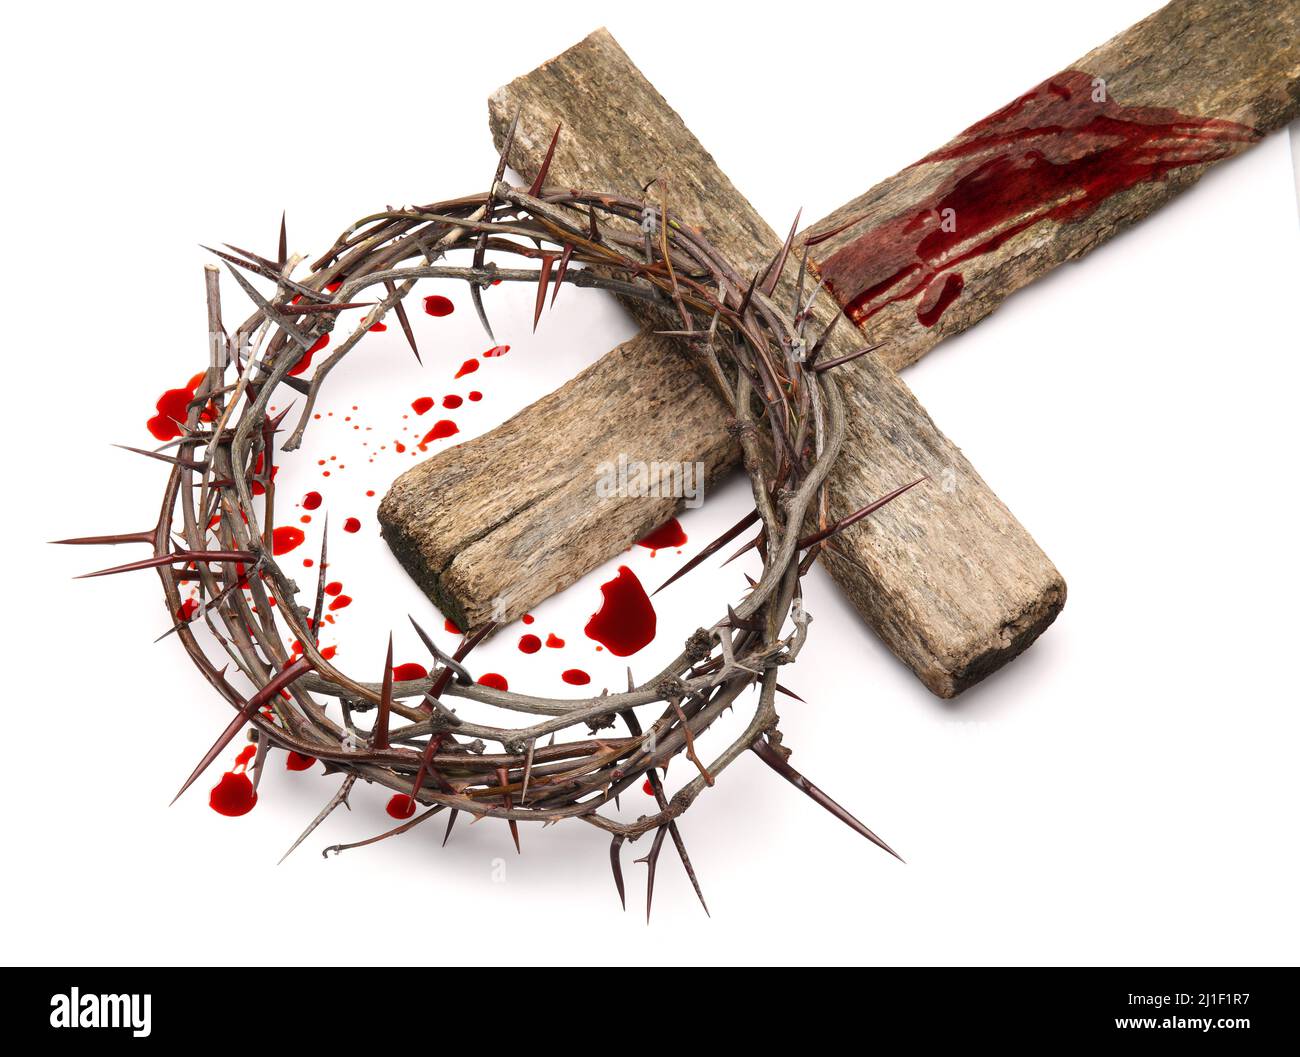 Crown of thorns, wooden cross and blood drops on white background. Jesus  Christ's sacrifice and atonement of our sins Stock Photo - Alamy